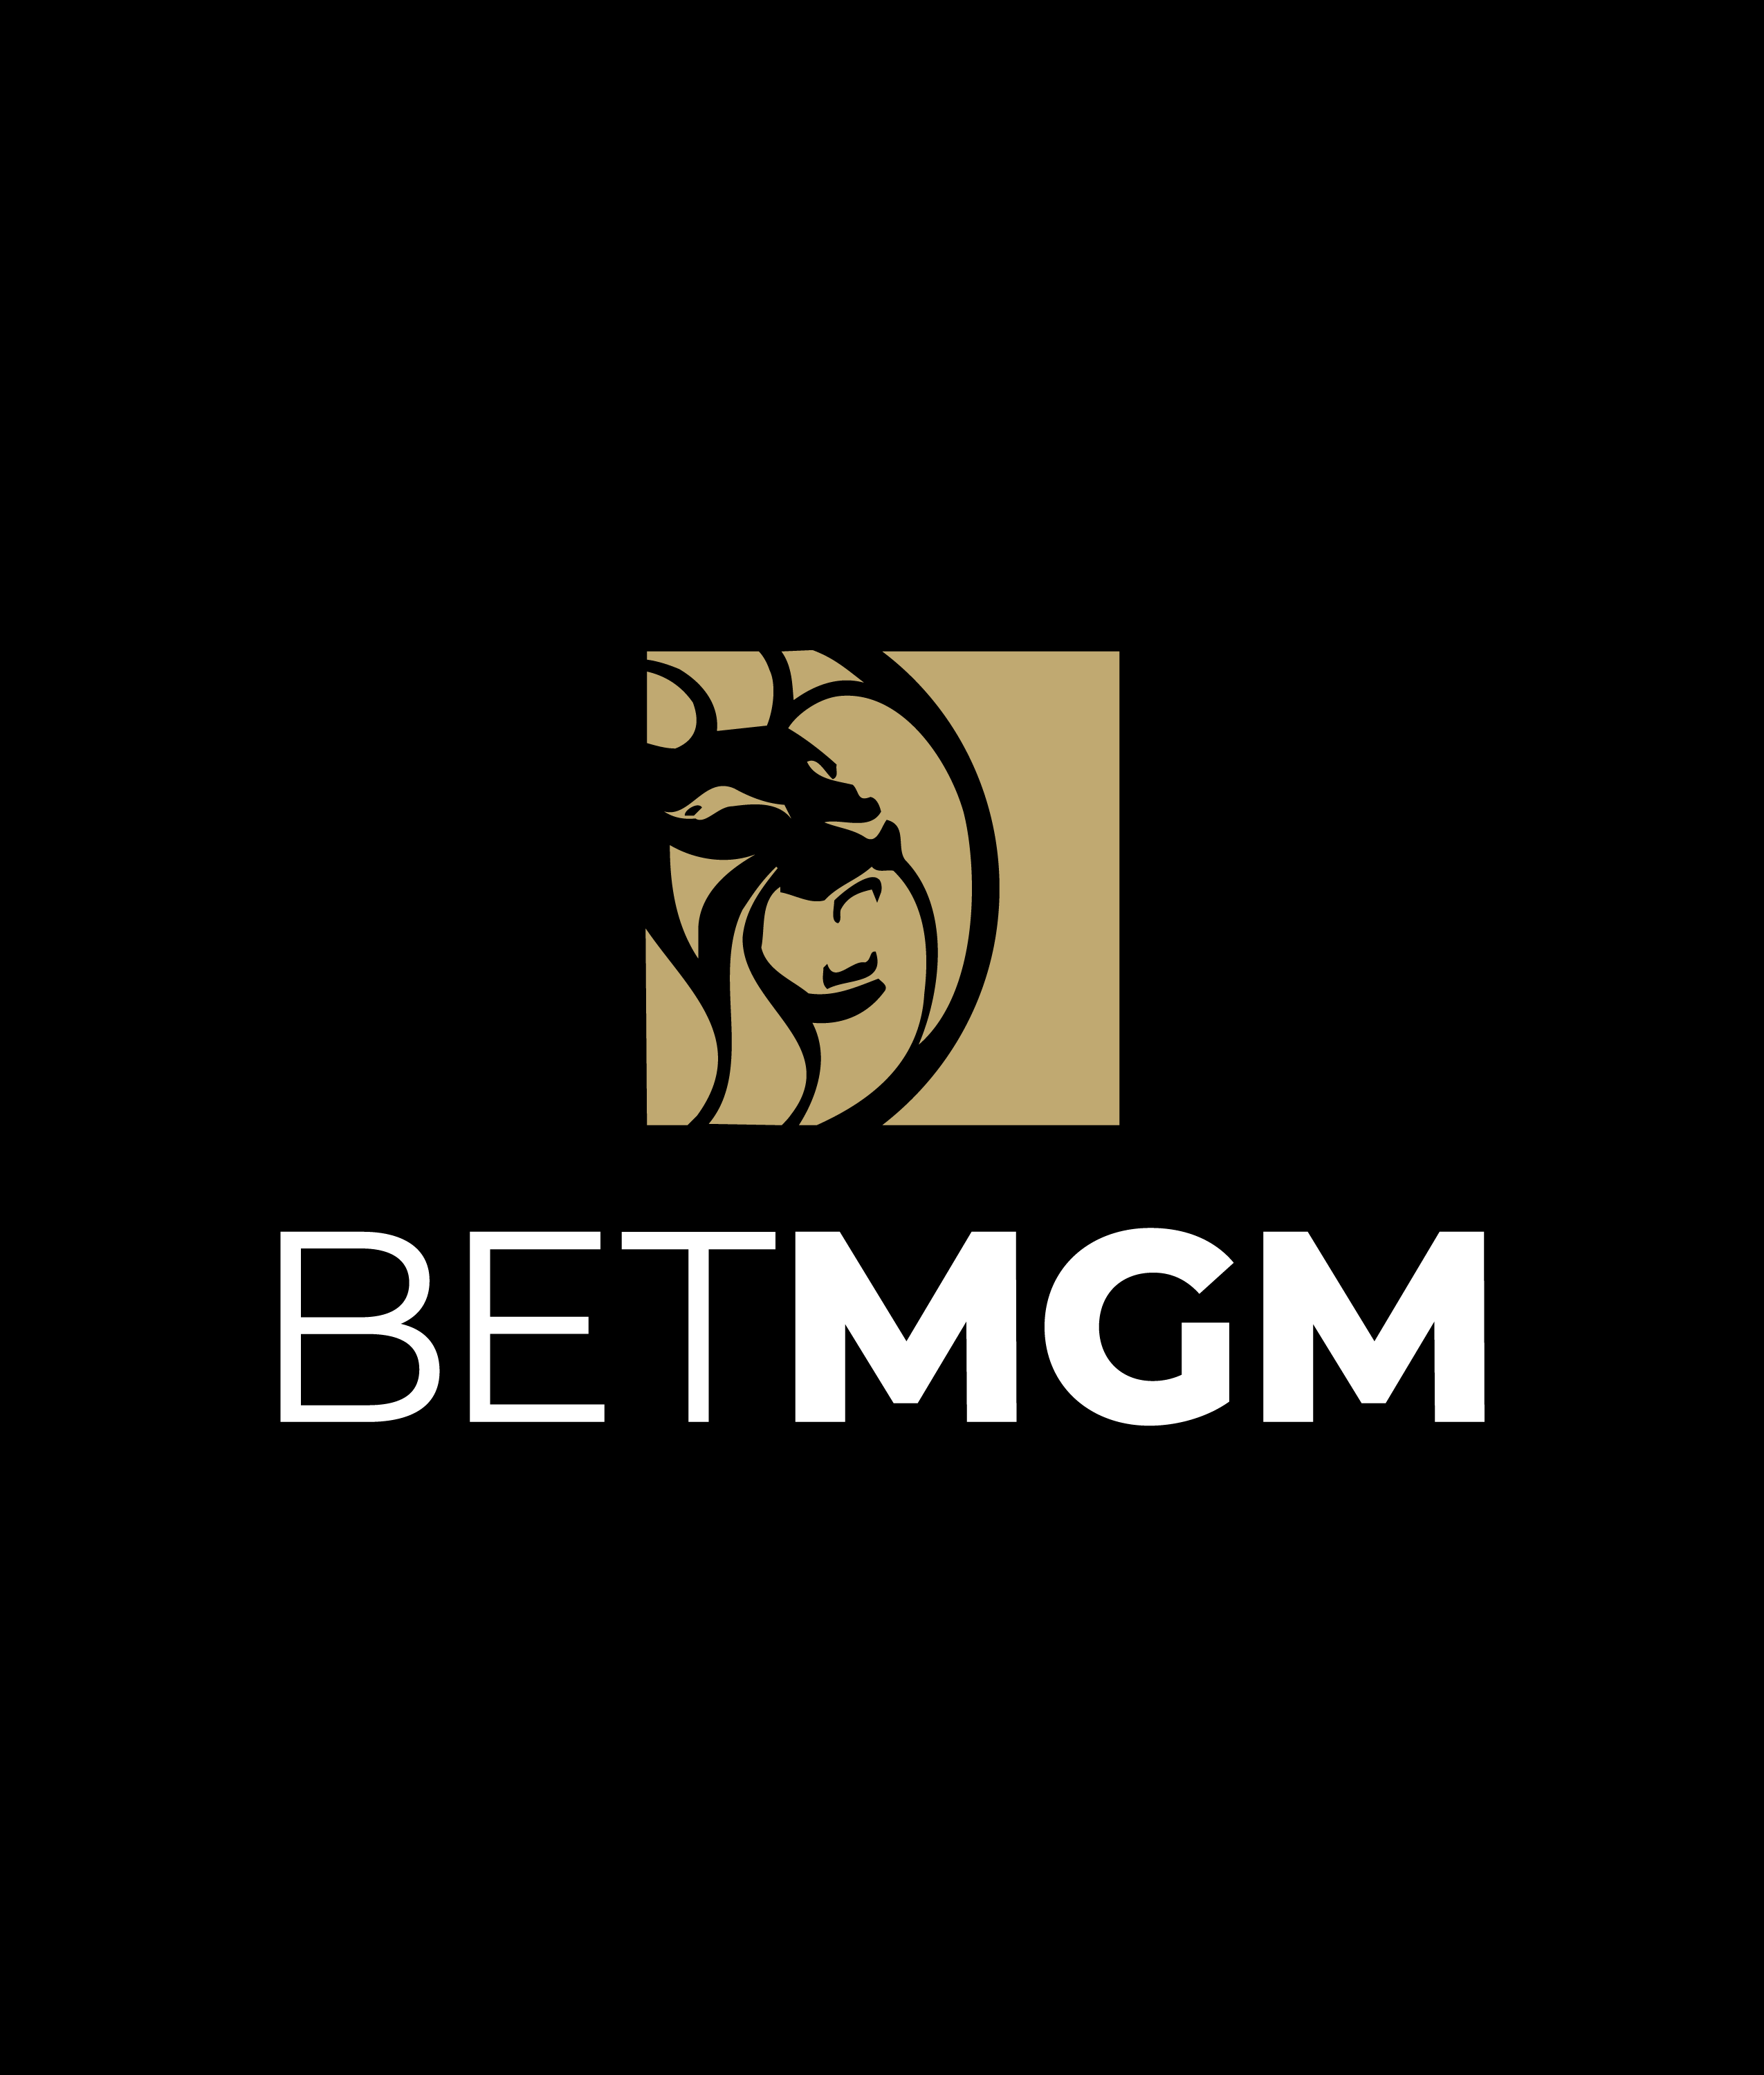 BetMGM Partners with SportsGrid on Streaming Content